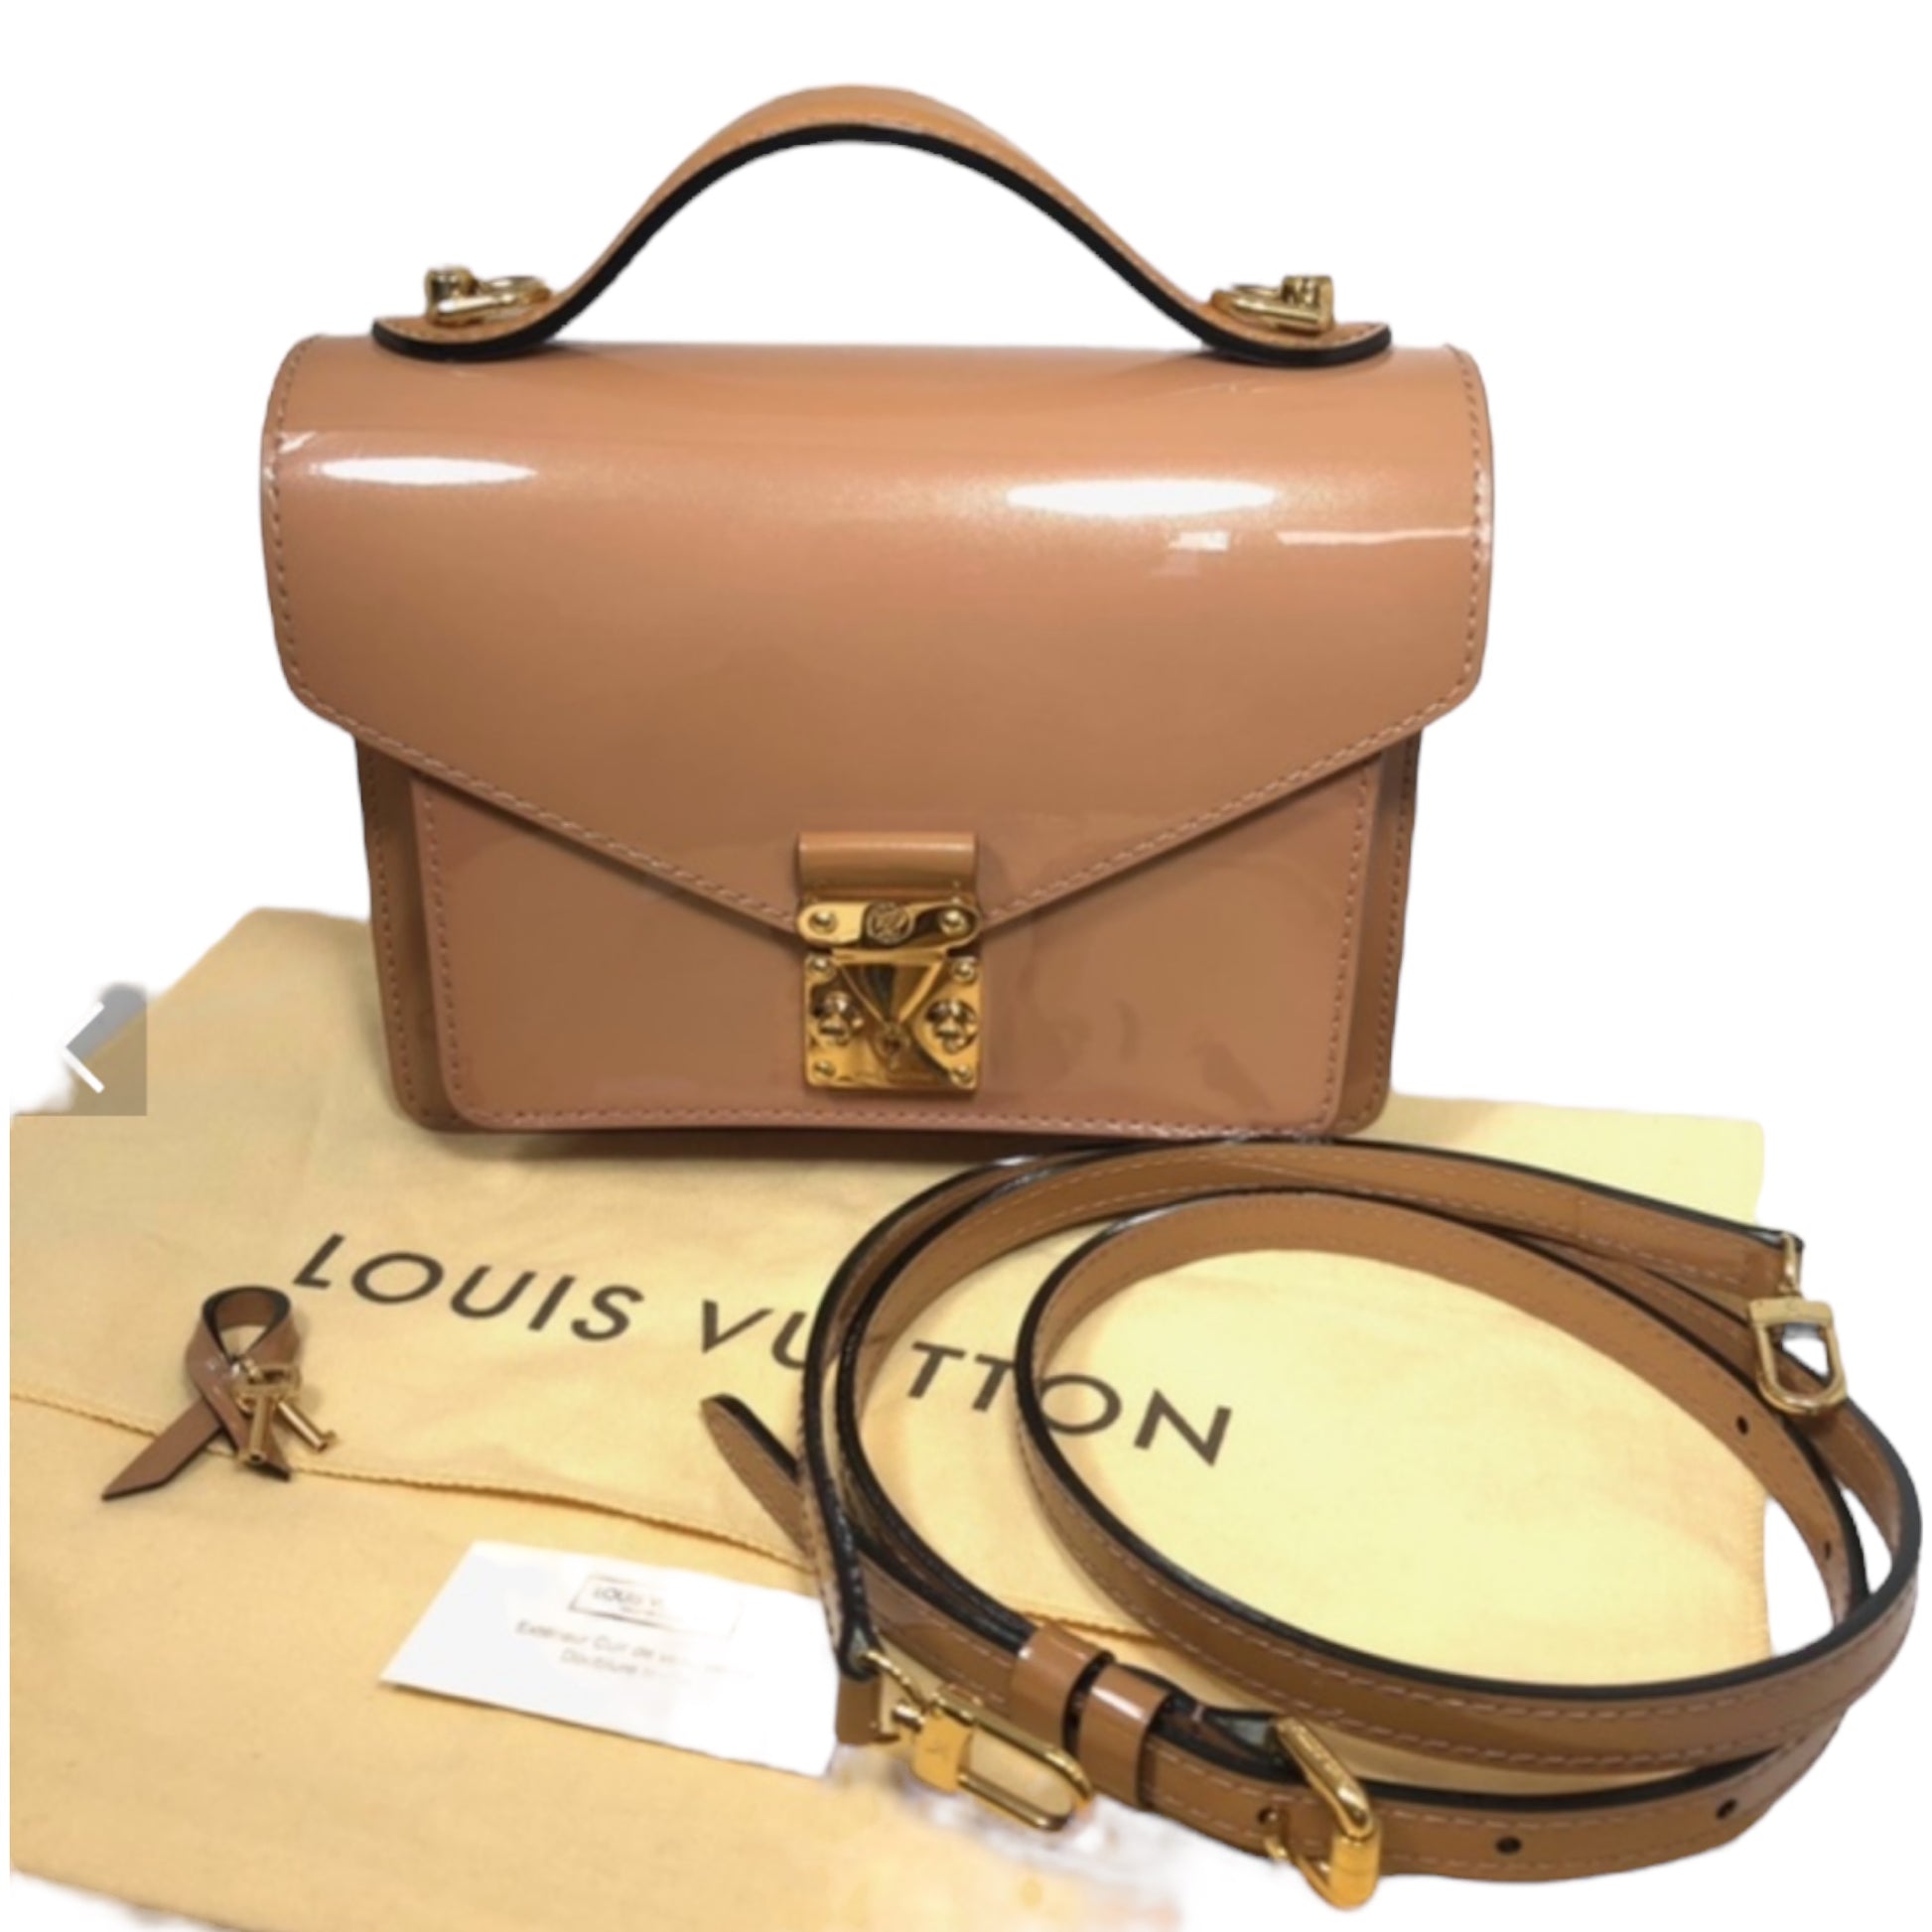 Louis Vuitton Monceau BB in Rose Velours jewelry pairing!